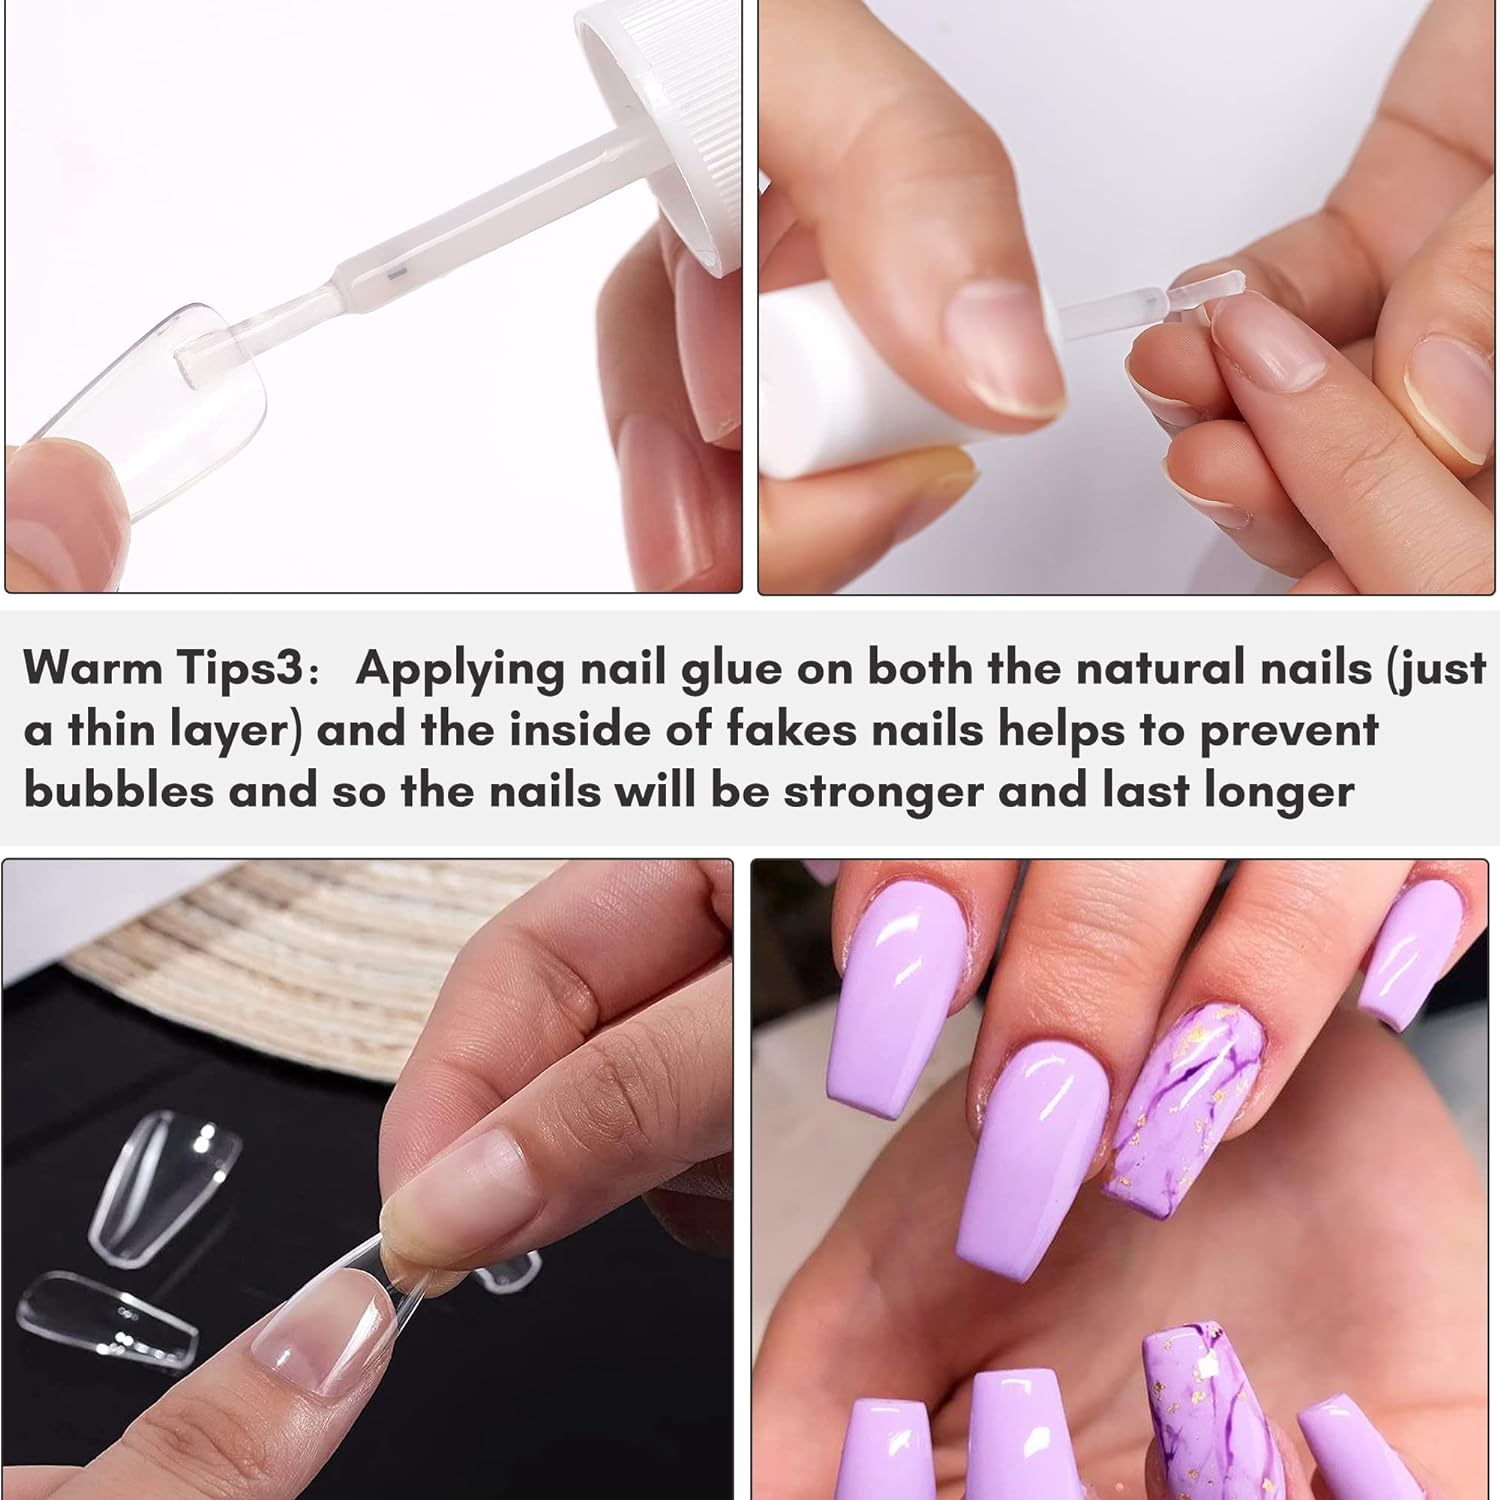 How To Make Fake Nails At Home Without Nail Glue | DIY fake nails from home  supplies easy/fast | Fake nails, Diy long nails, Diy acrylic nails